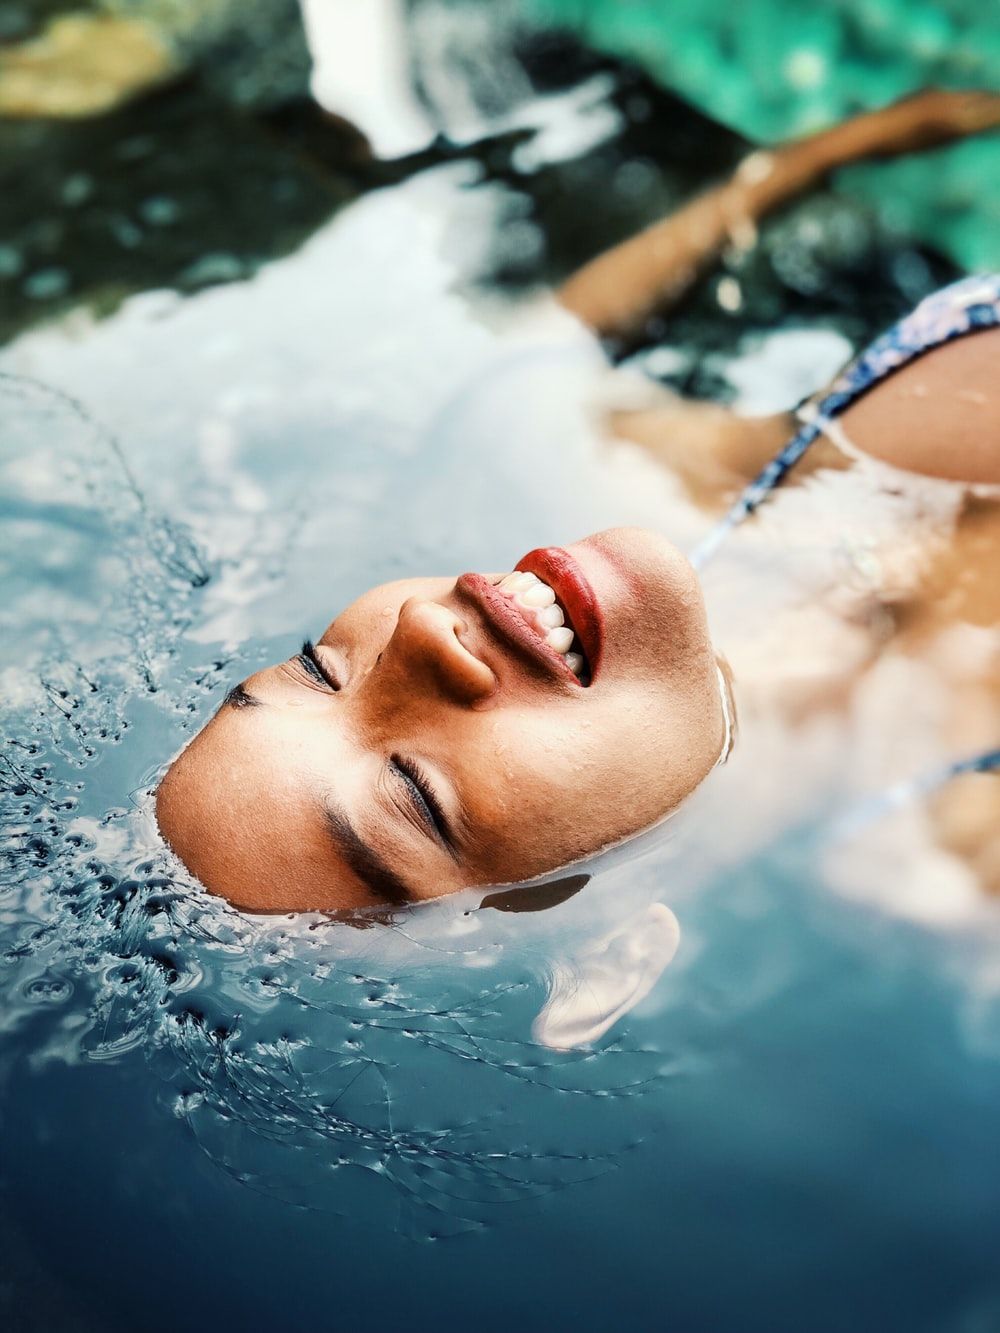 Woman In Water Picture. Download Free Image